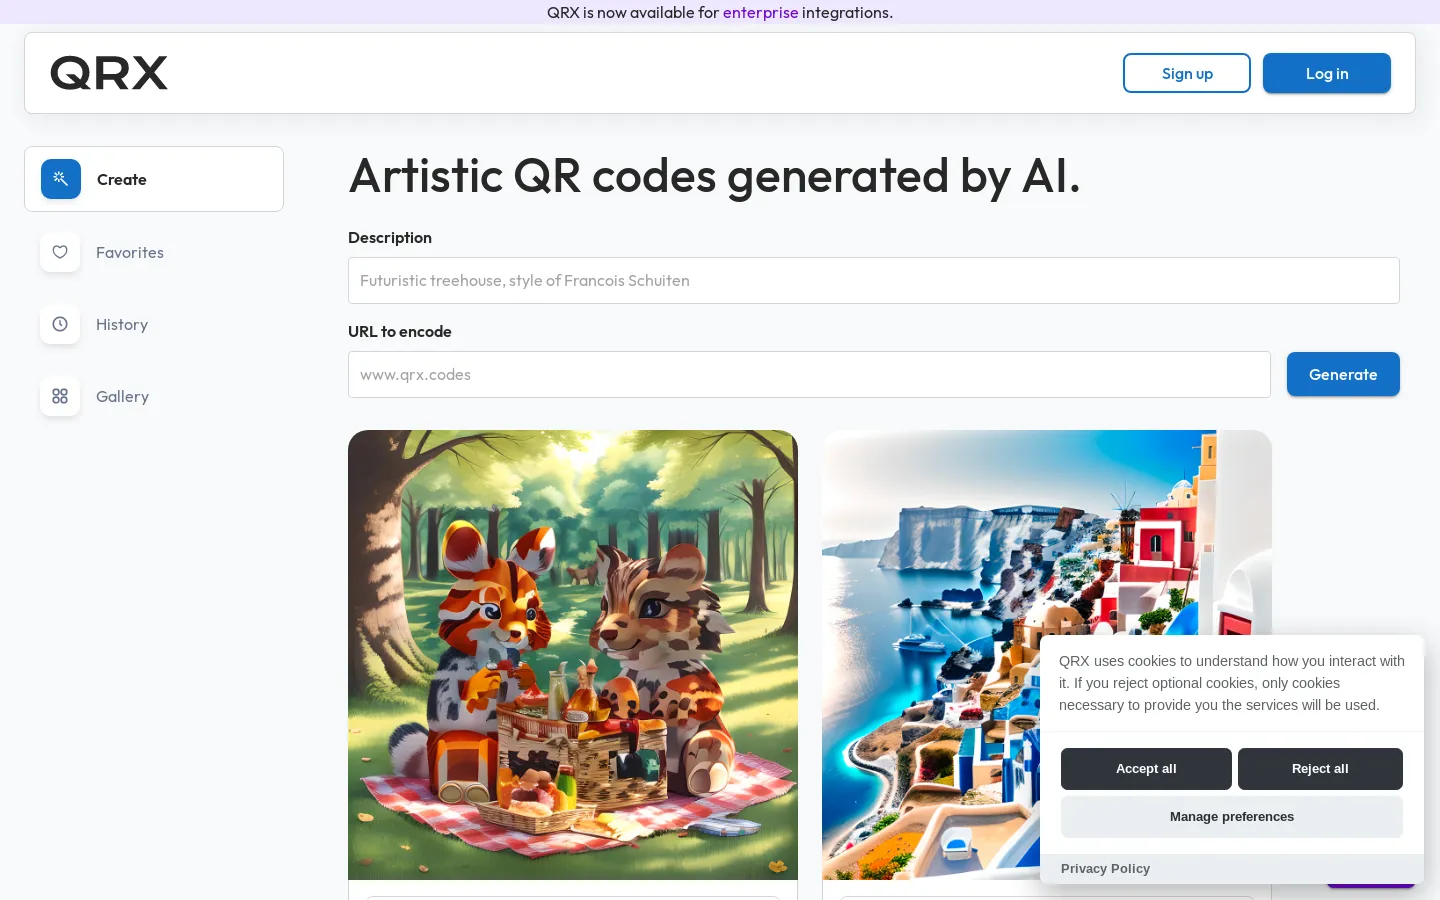 Artistic QR codes generated by AI. | QRX Codes